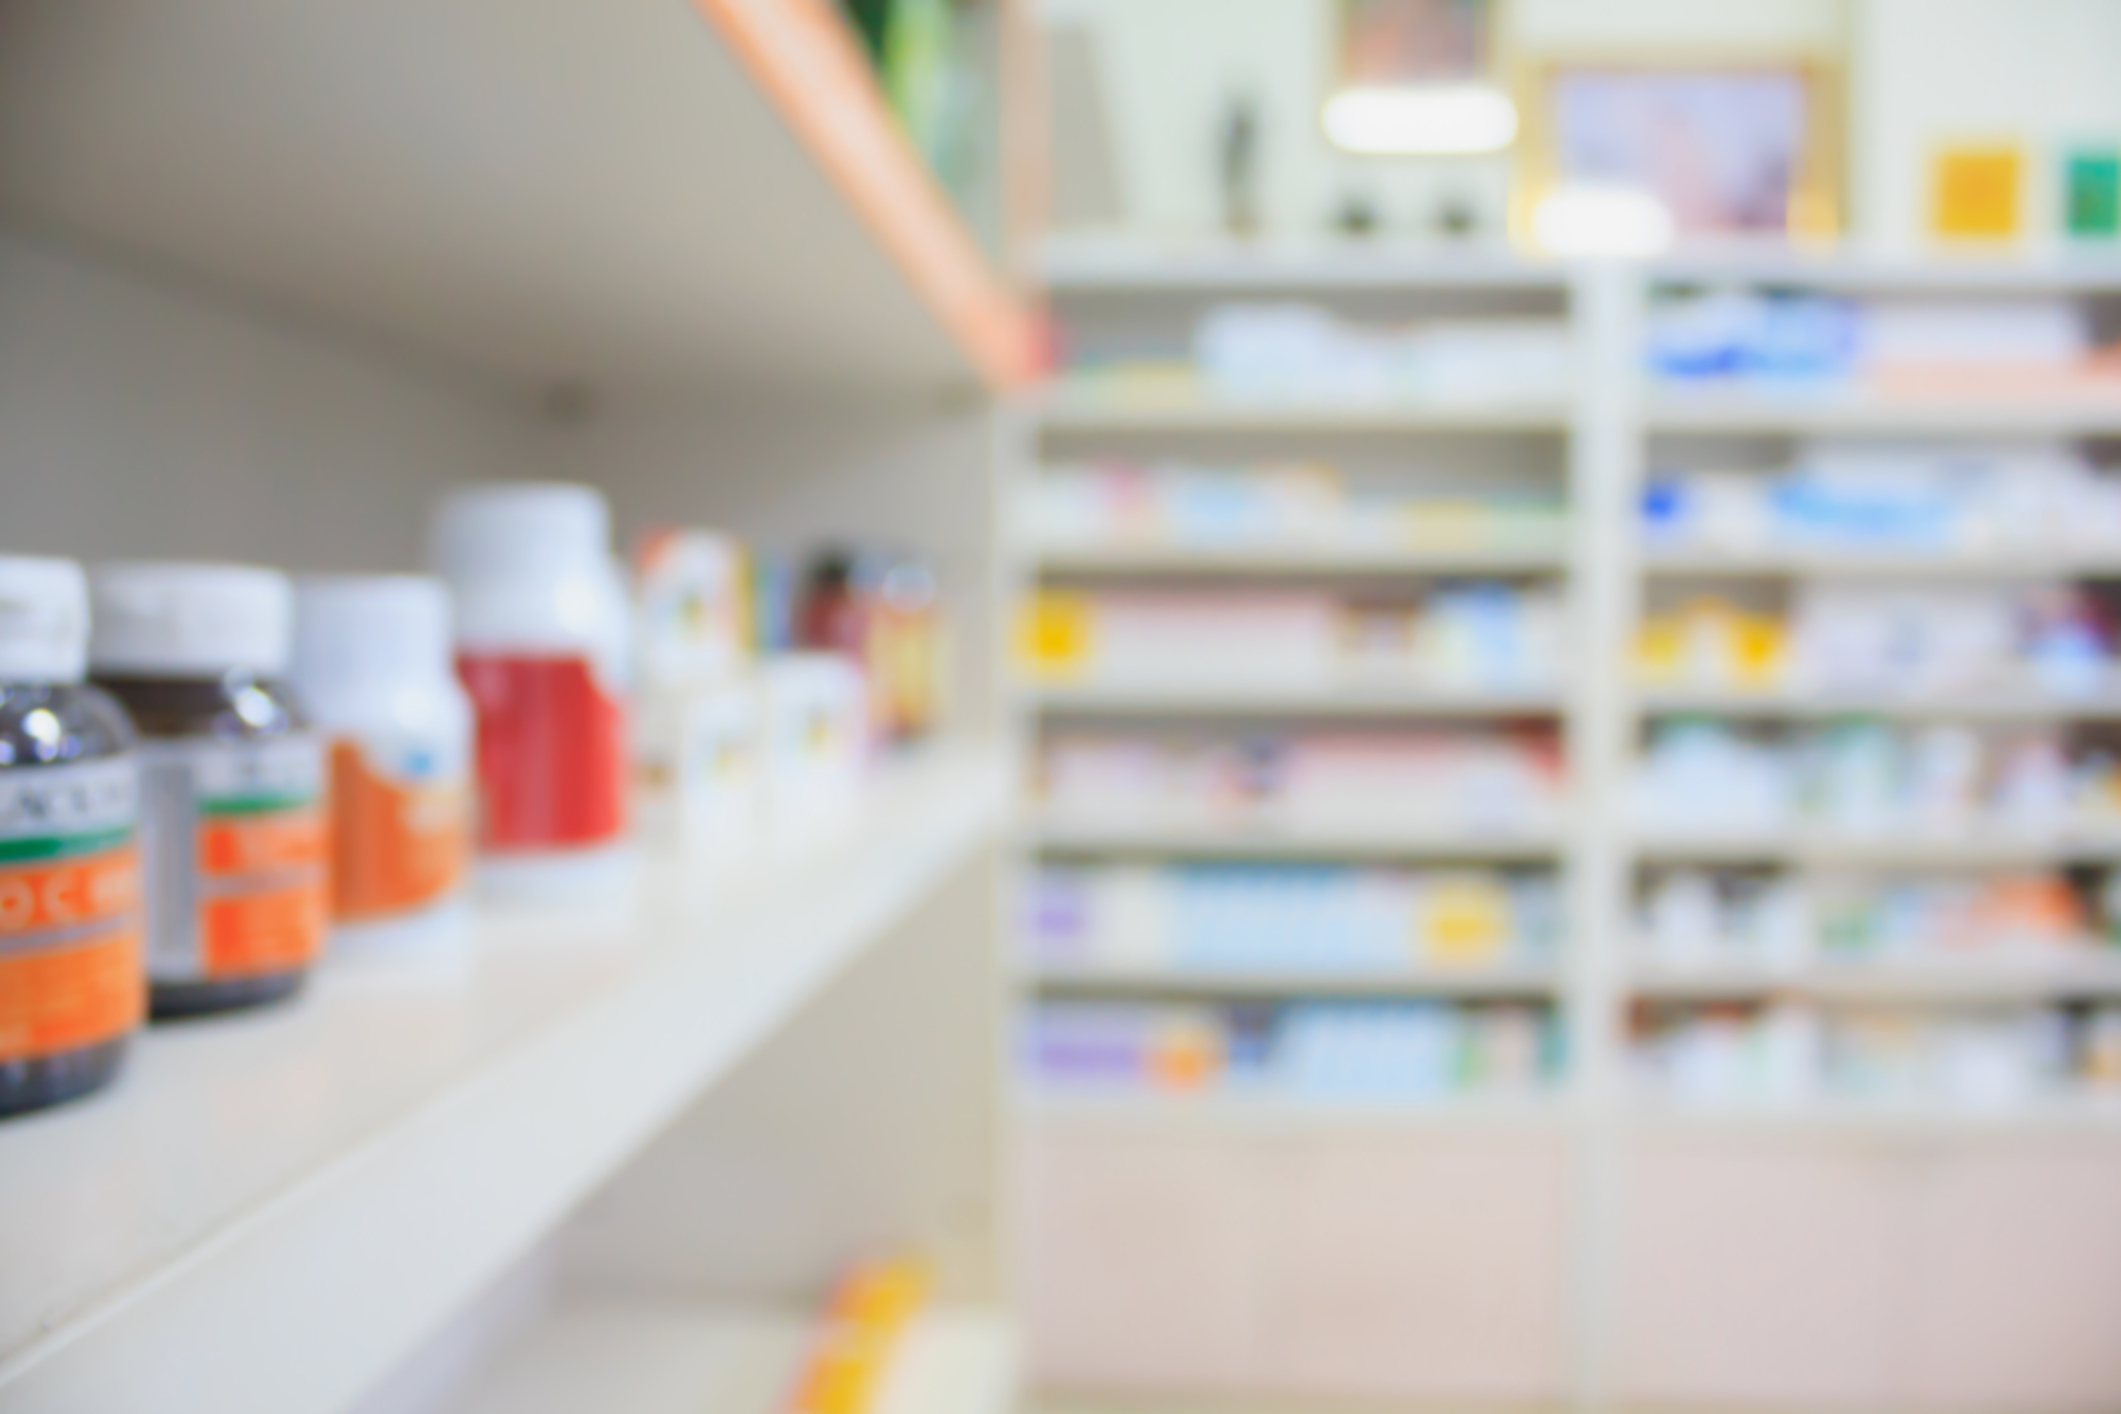 5 Rules for Stocking Rarely Used Medical Supplies